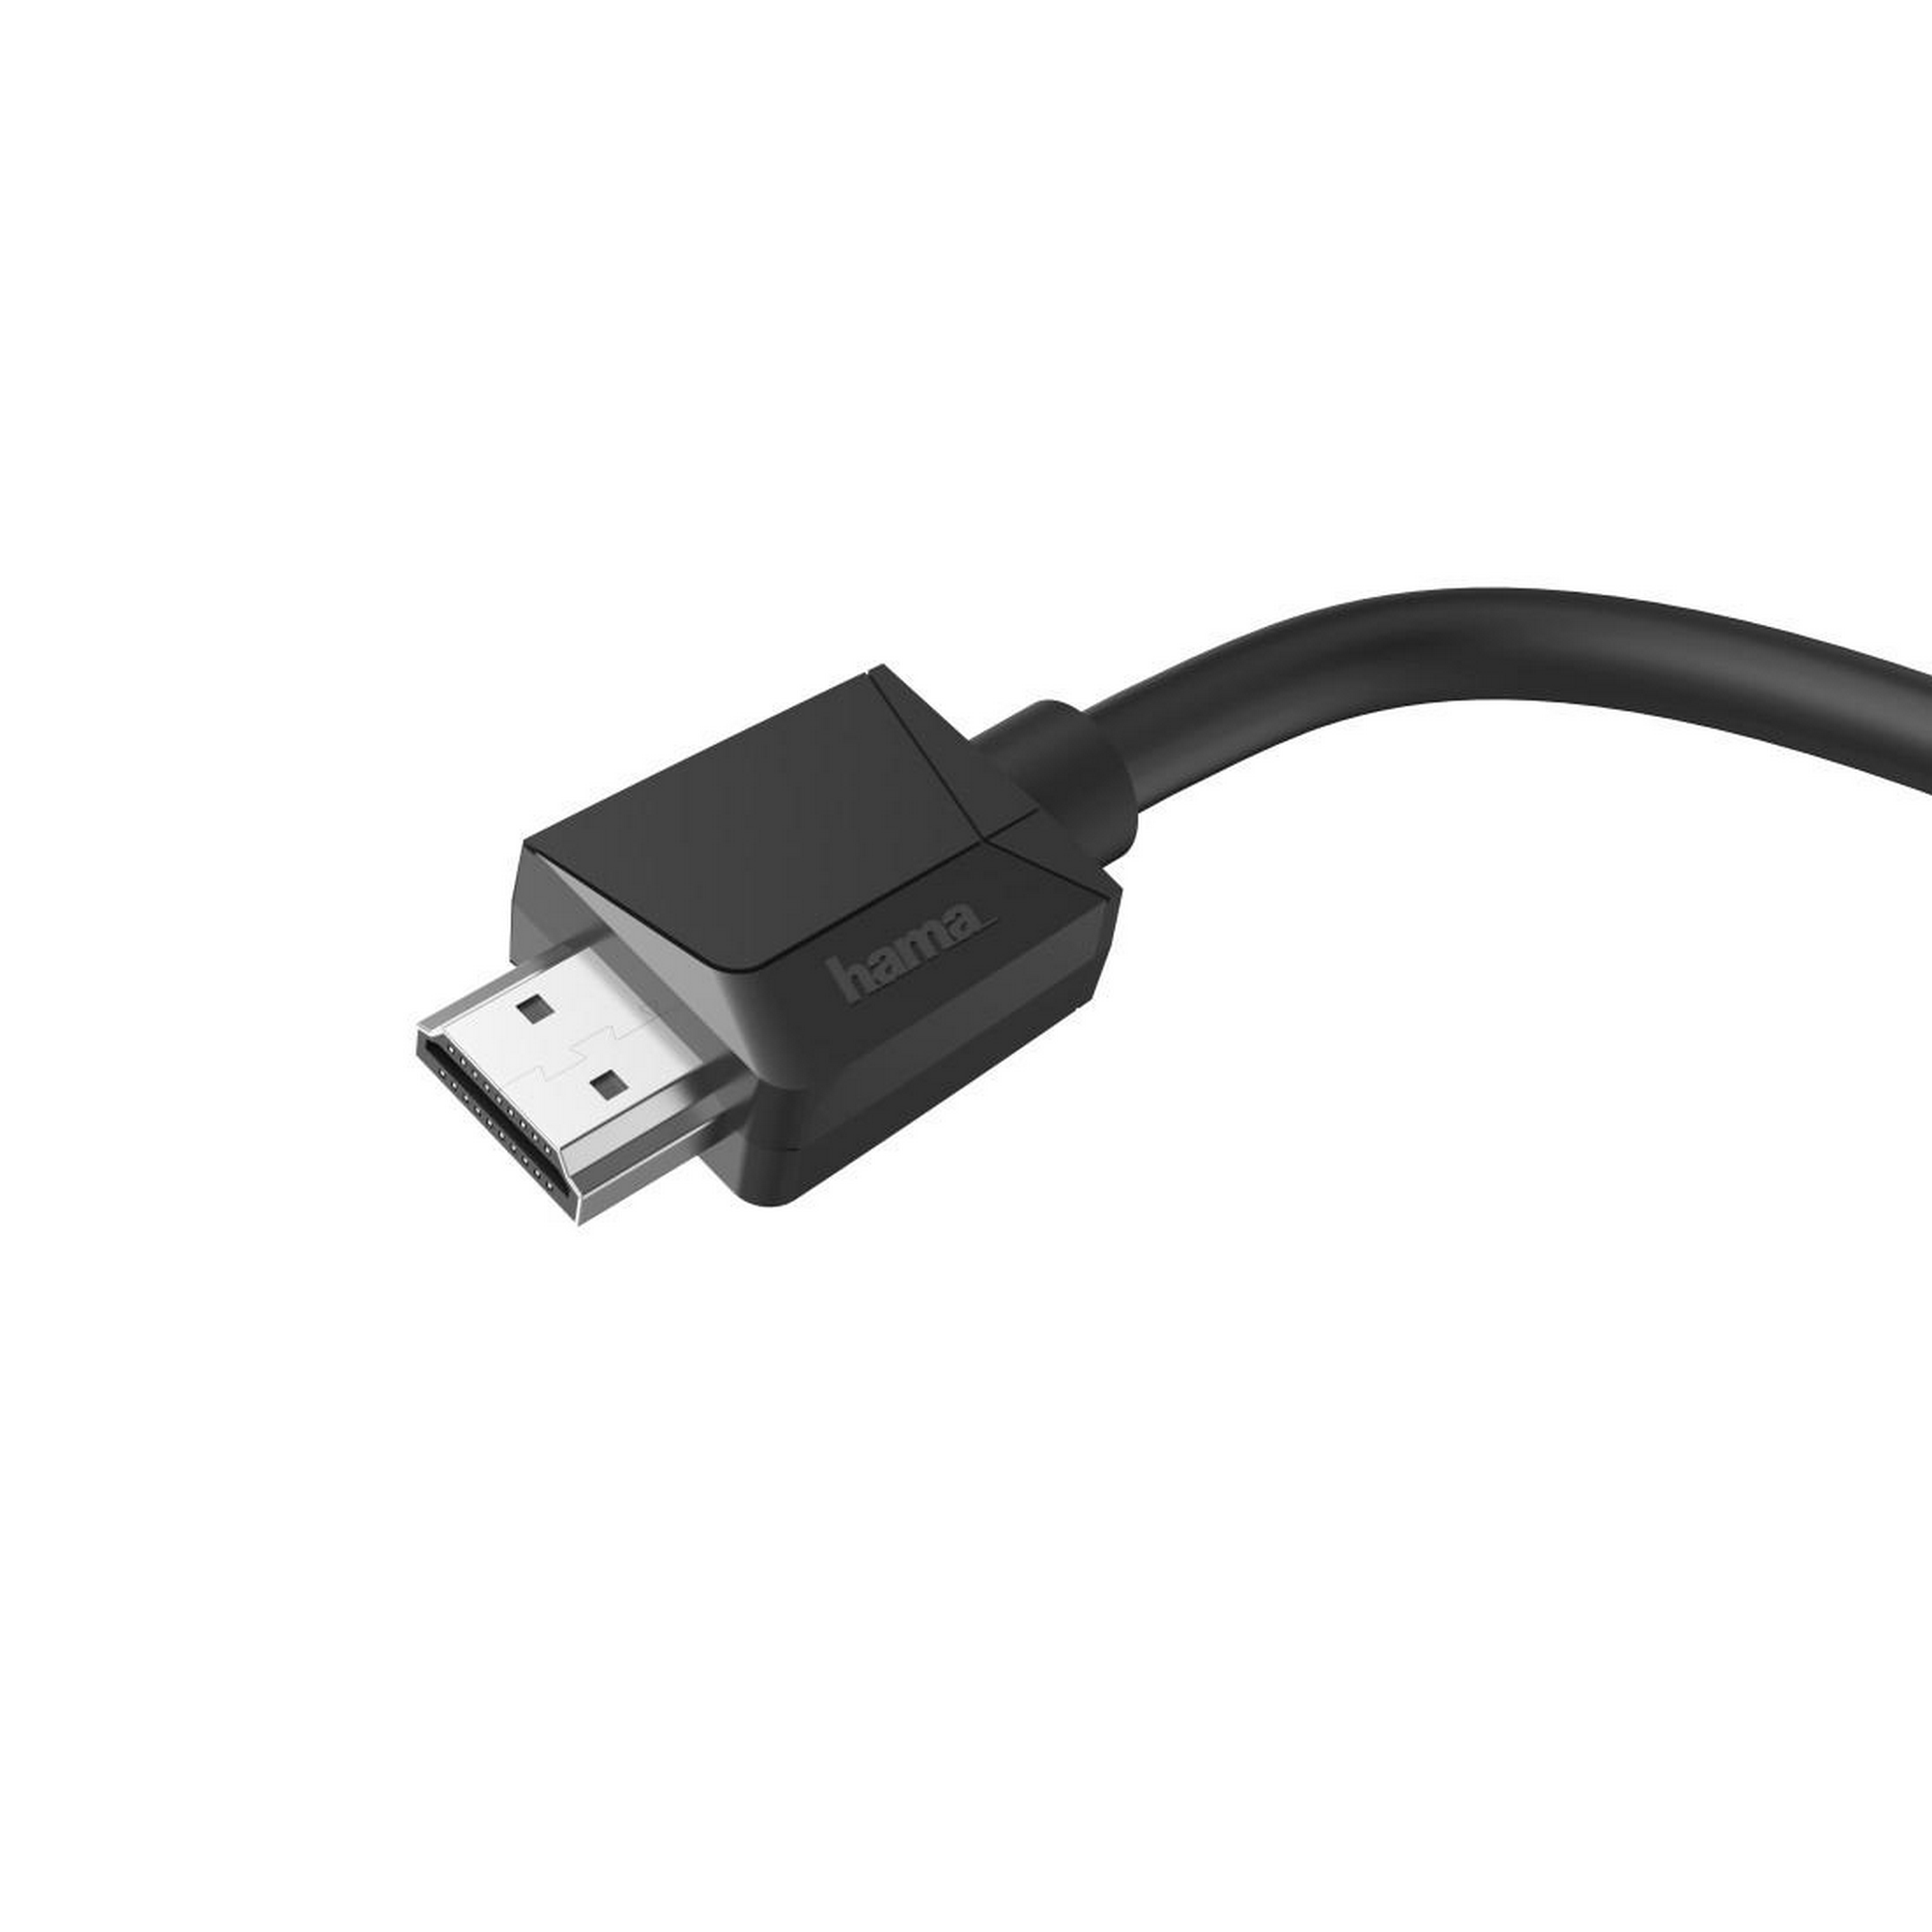 HDMI-Kabel 'Essential Line' High-Speed Ethernet 4K schwarz 1,5 m + product picture